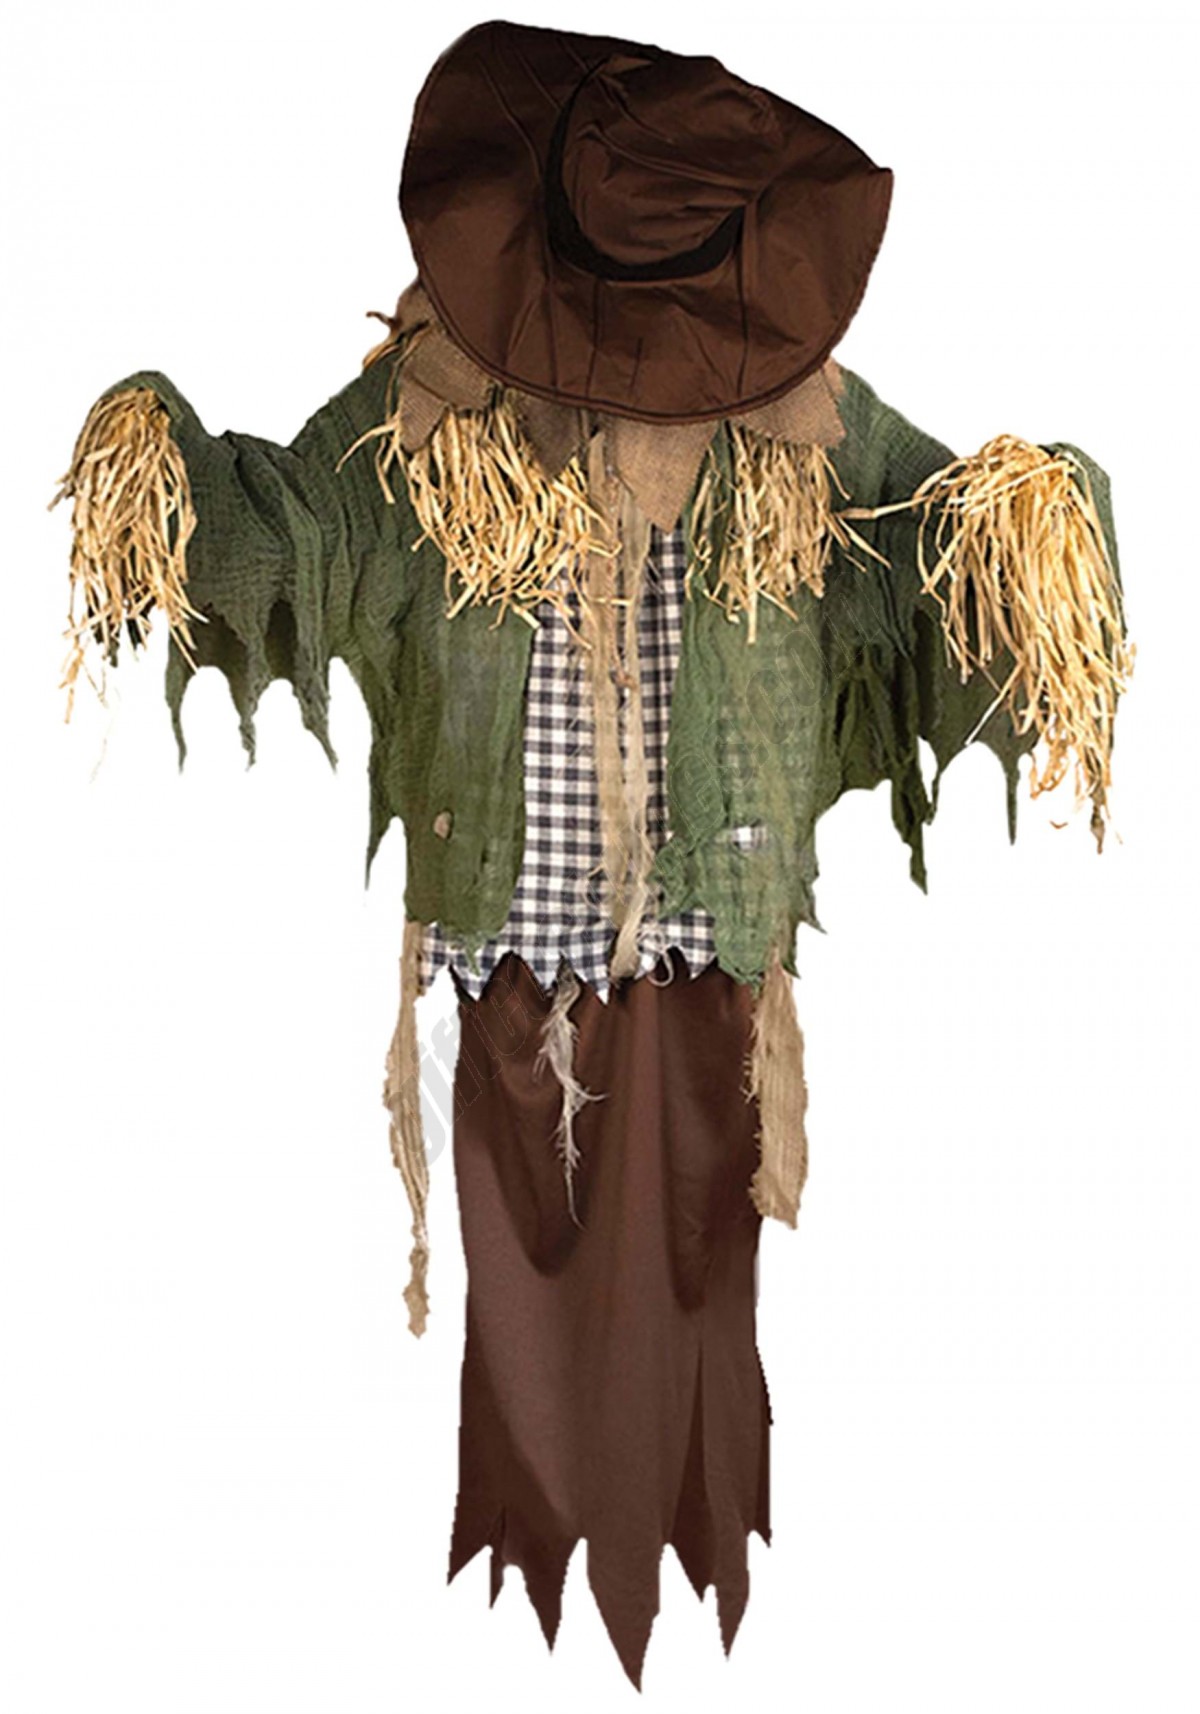 Surprise Animated Hanging Scarecrow Promotions - -1